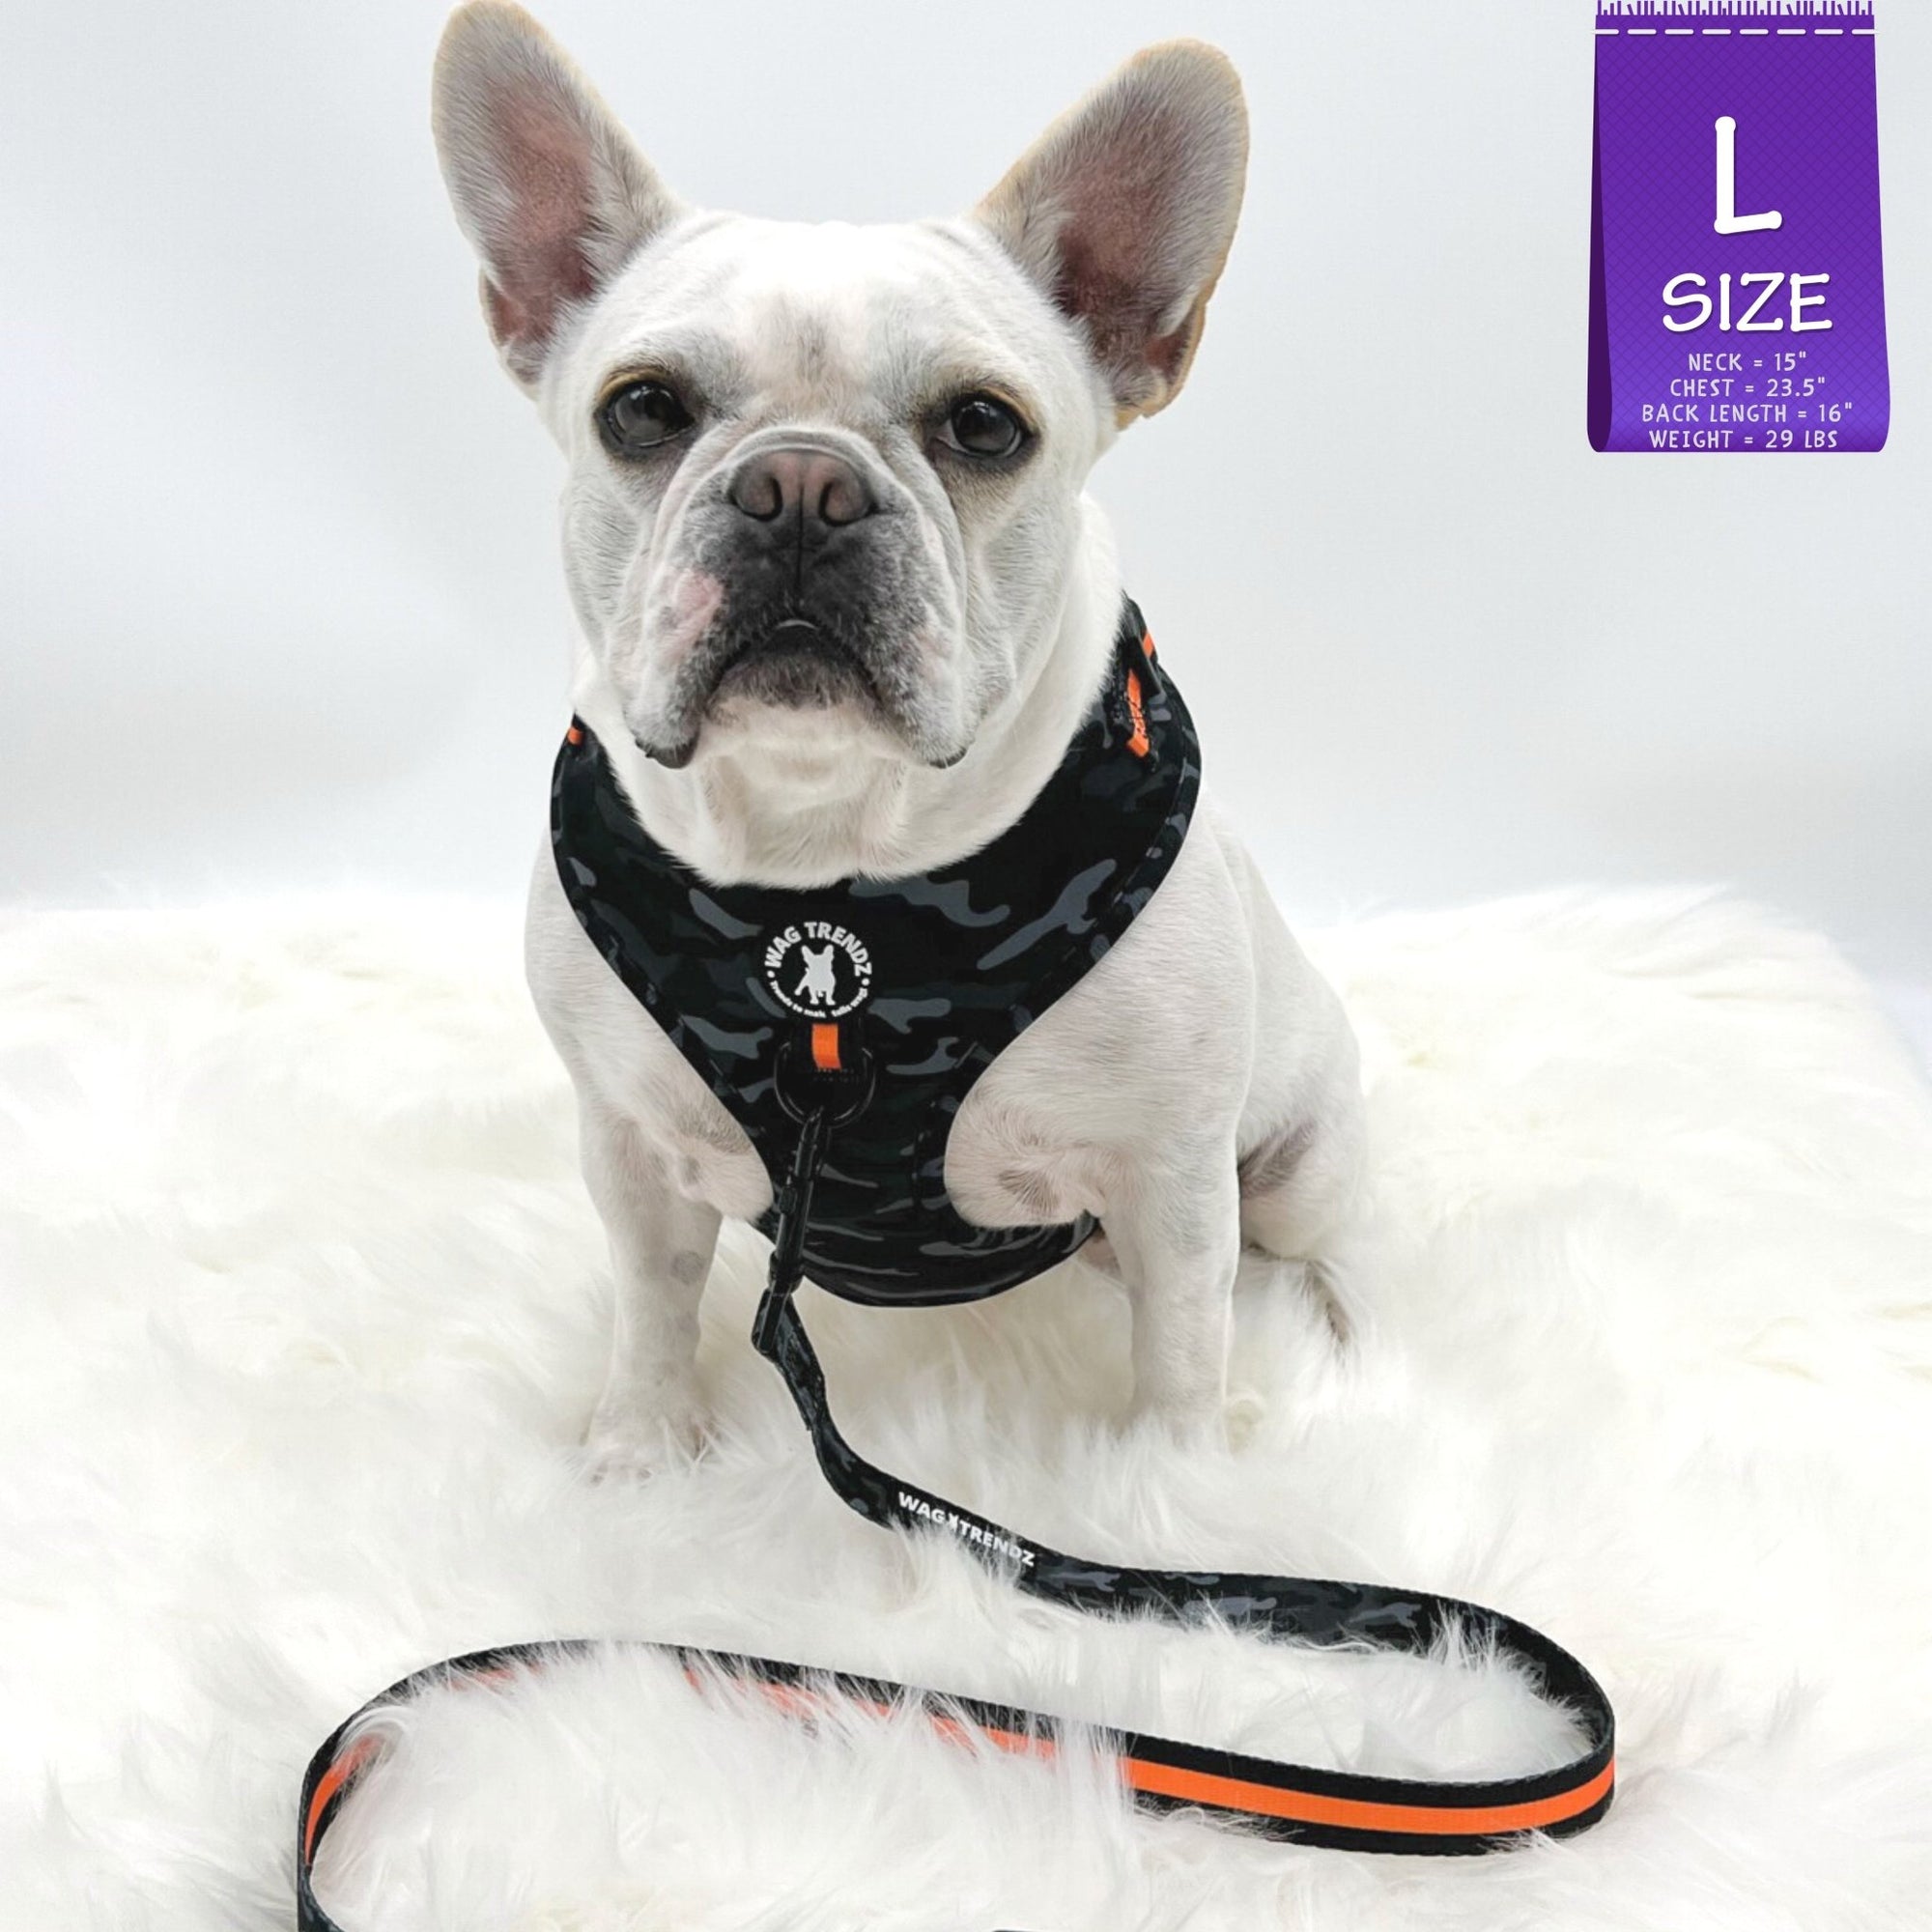 Dog Harness and Leash Set - French Bulldog wearing Black &amp; Gray camo dog harness with Orange Accents and Matching Dog Leash attached - against solid white background - Wag Trendz